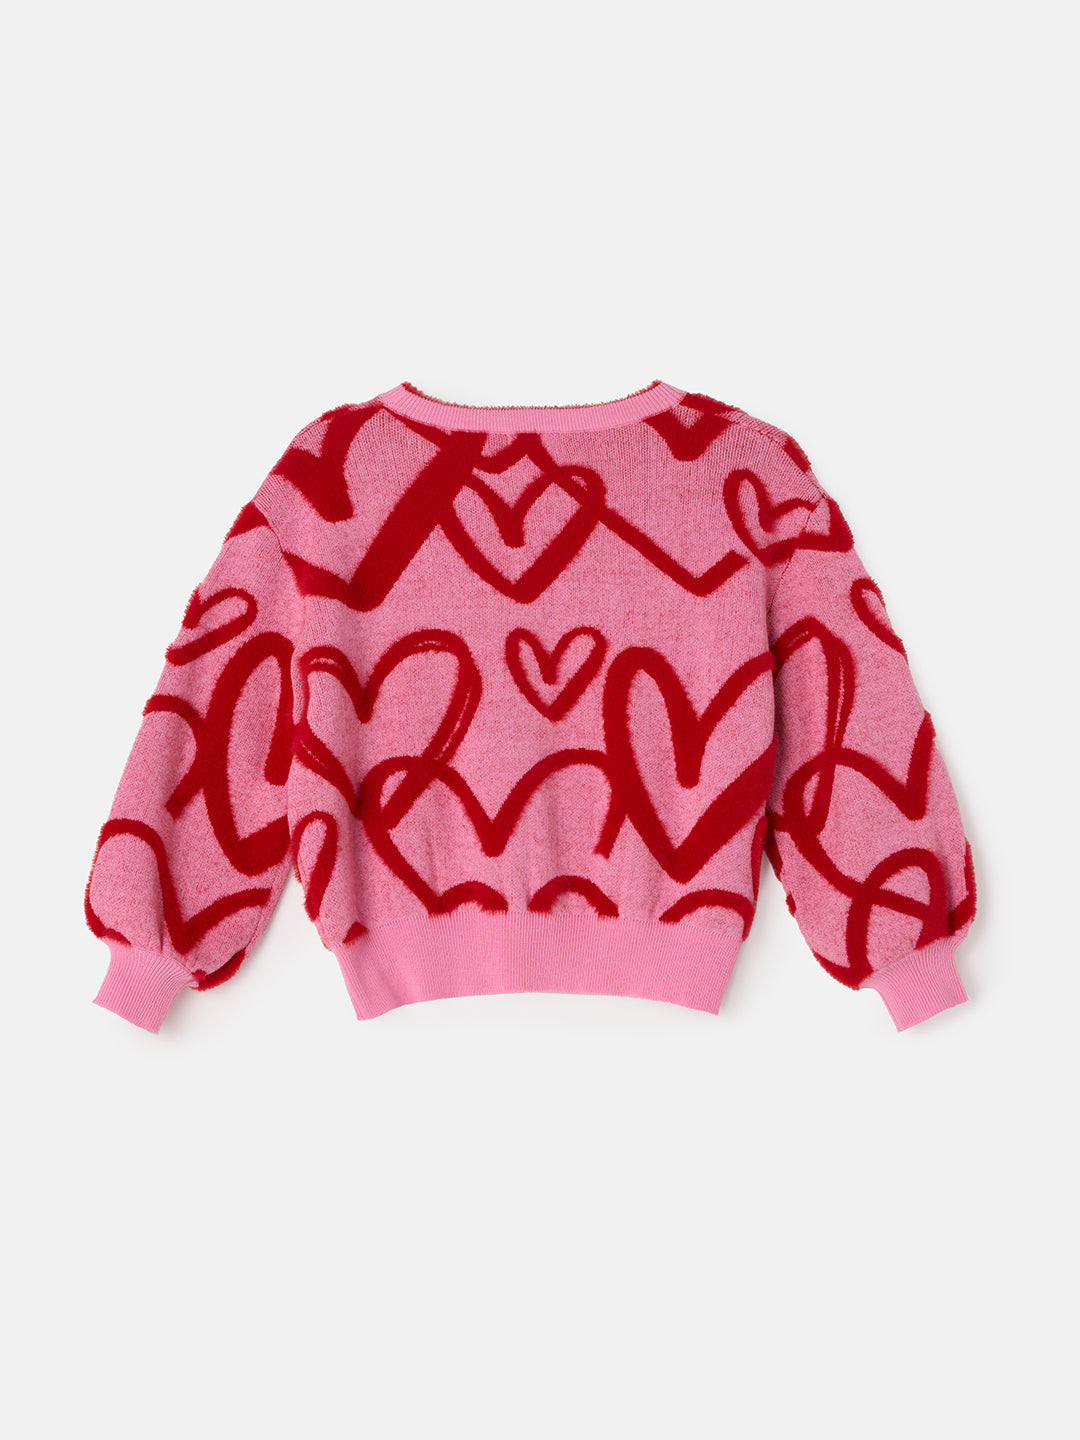 Girls Pink Heart Printed Cuff Sleeves Sweater